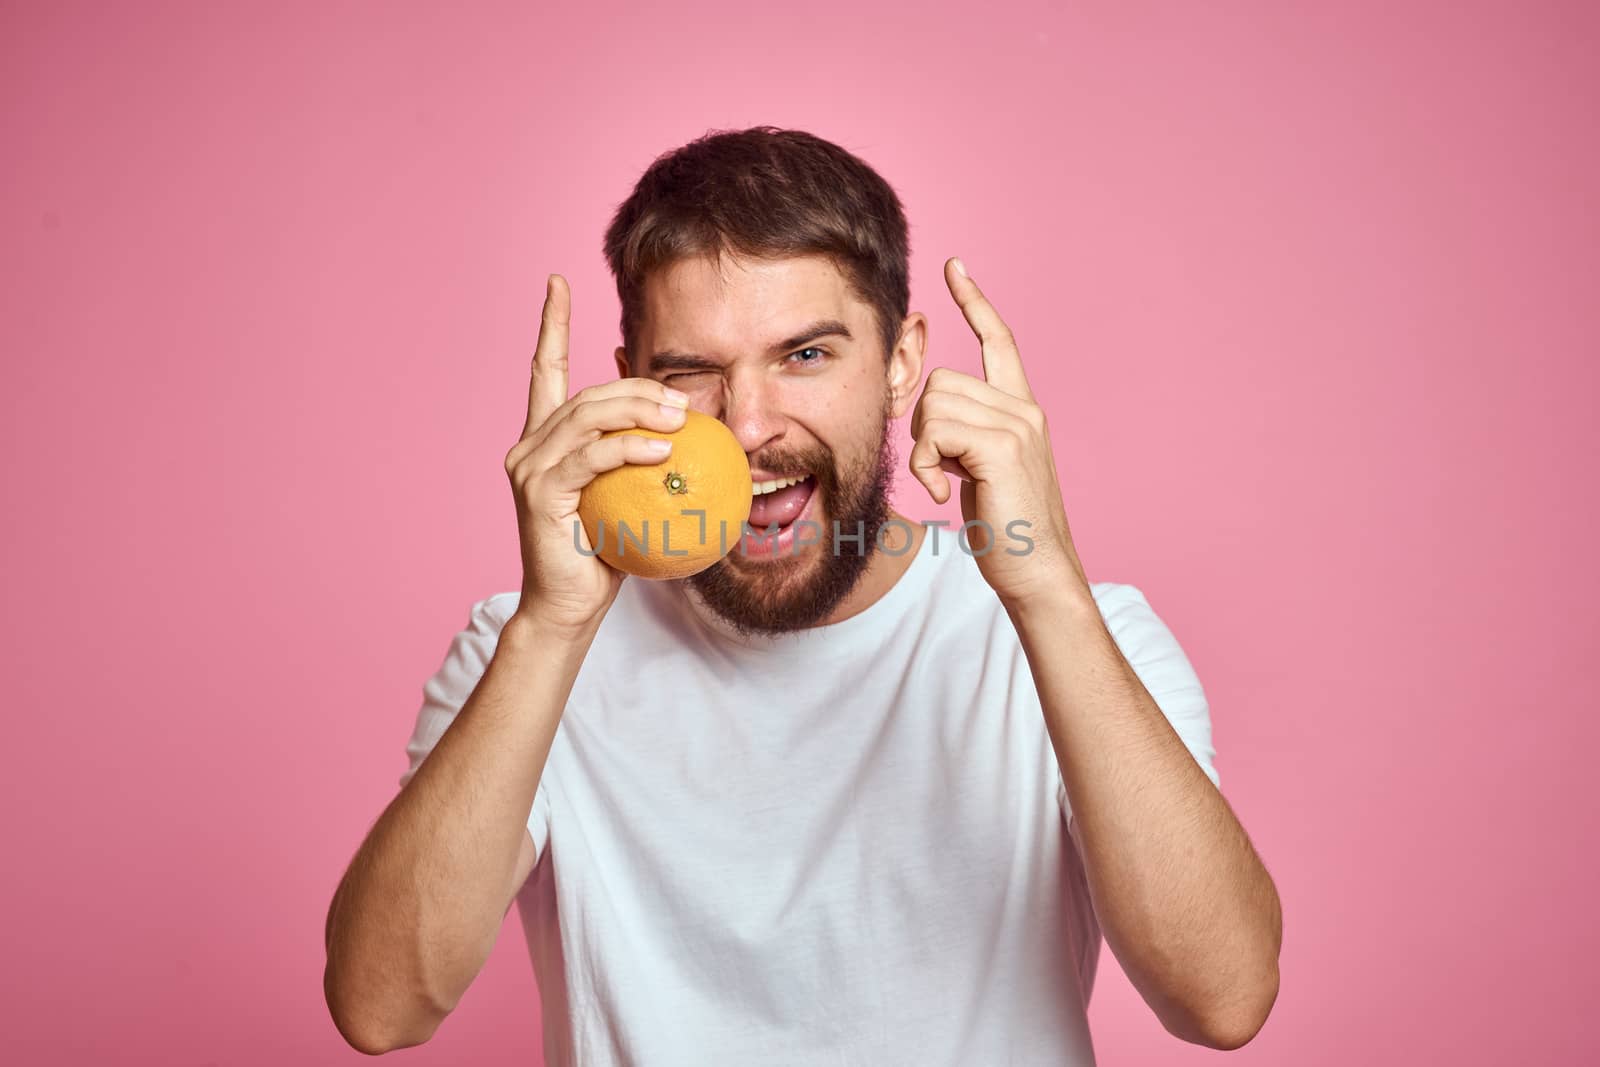 Young man with orange on a pink background in a white t-shirt emotions fun gesticulating with model hands by SHOTPRIME